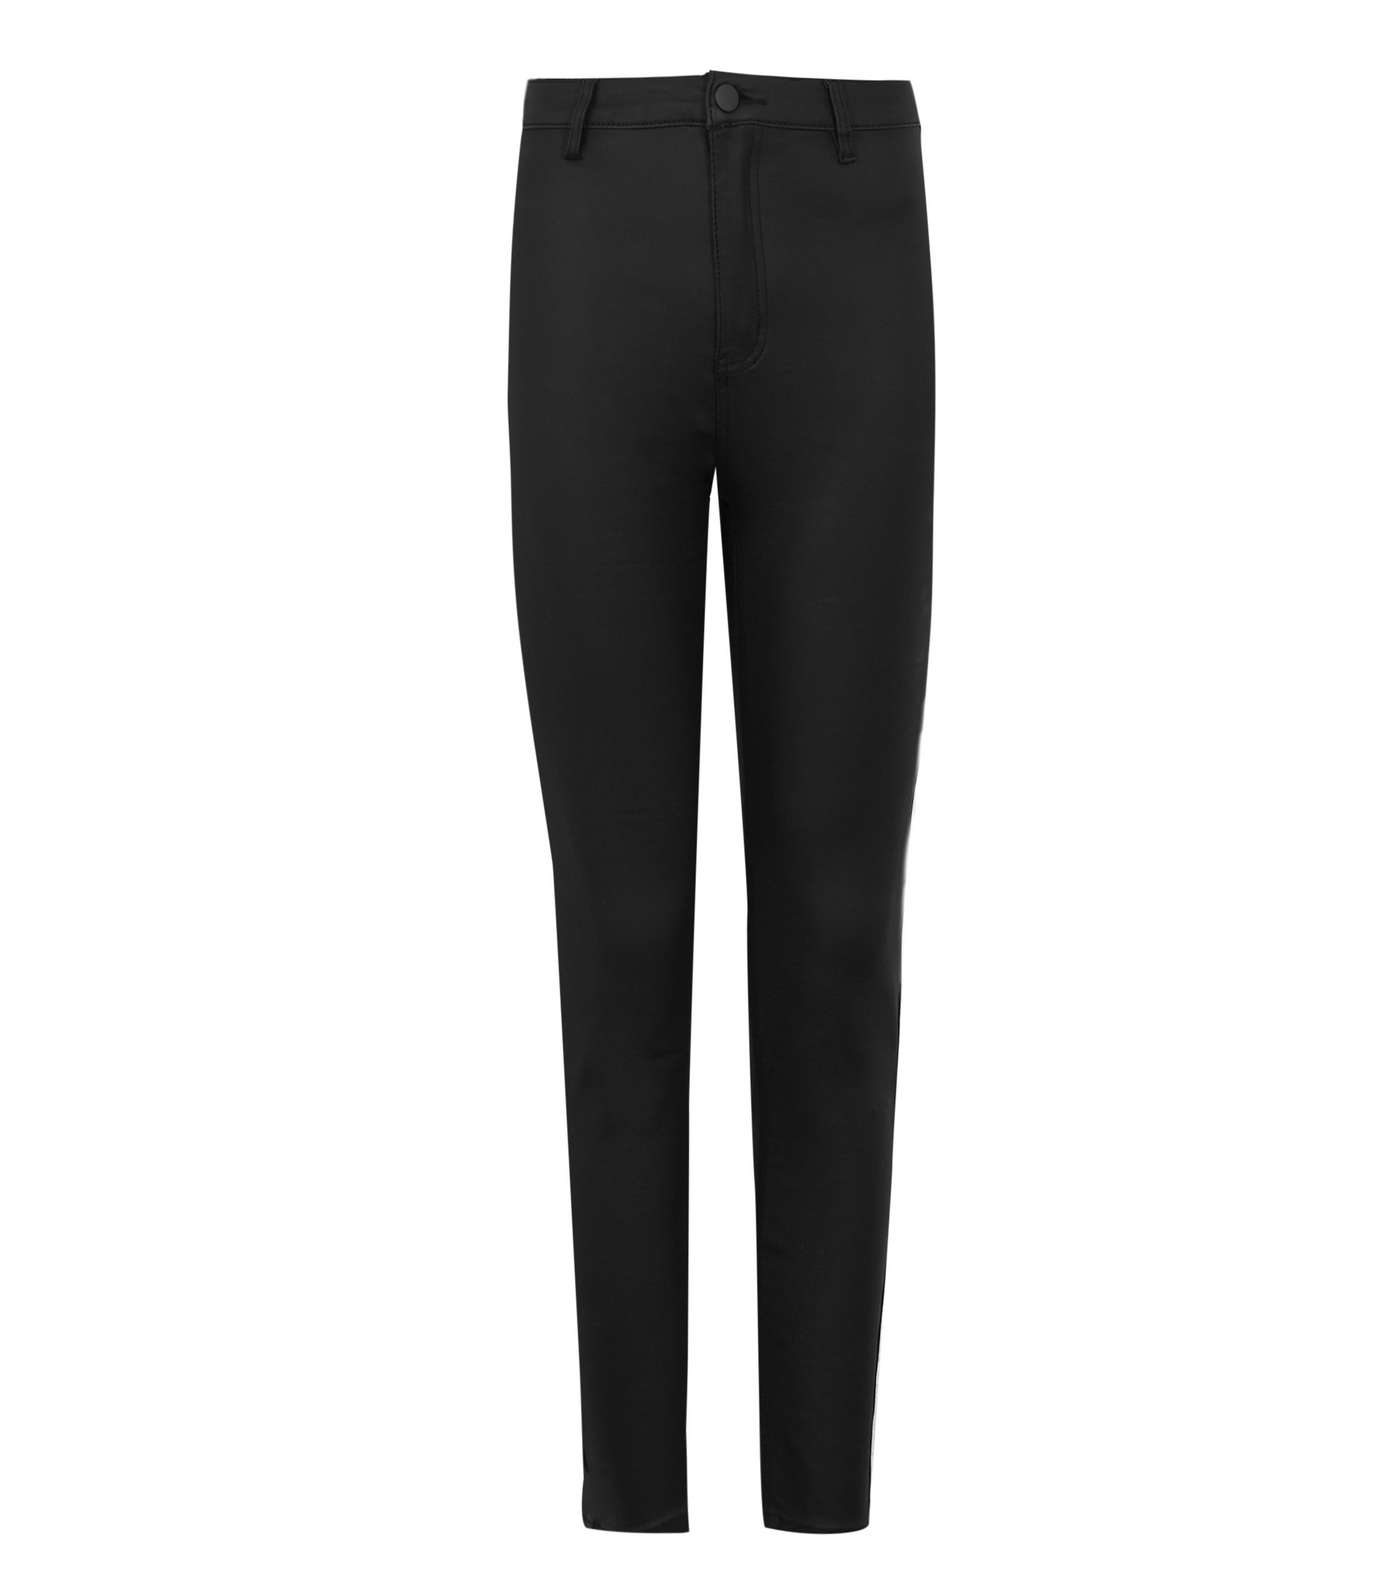 Urban Bliss Black Coated Leather-Look Super Skinny Jeans Image 5